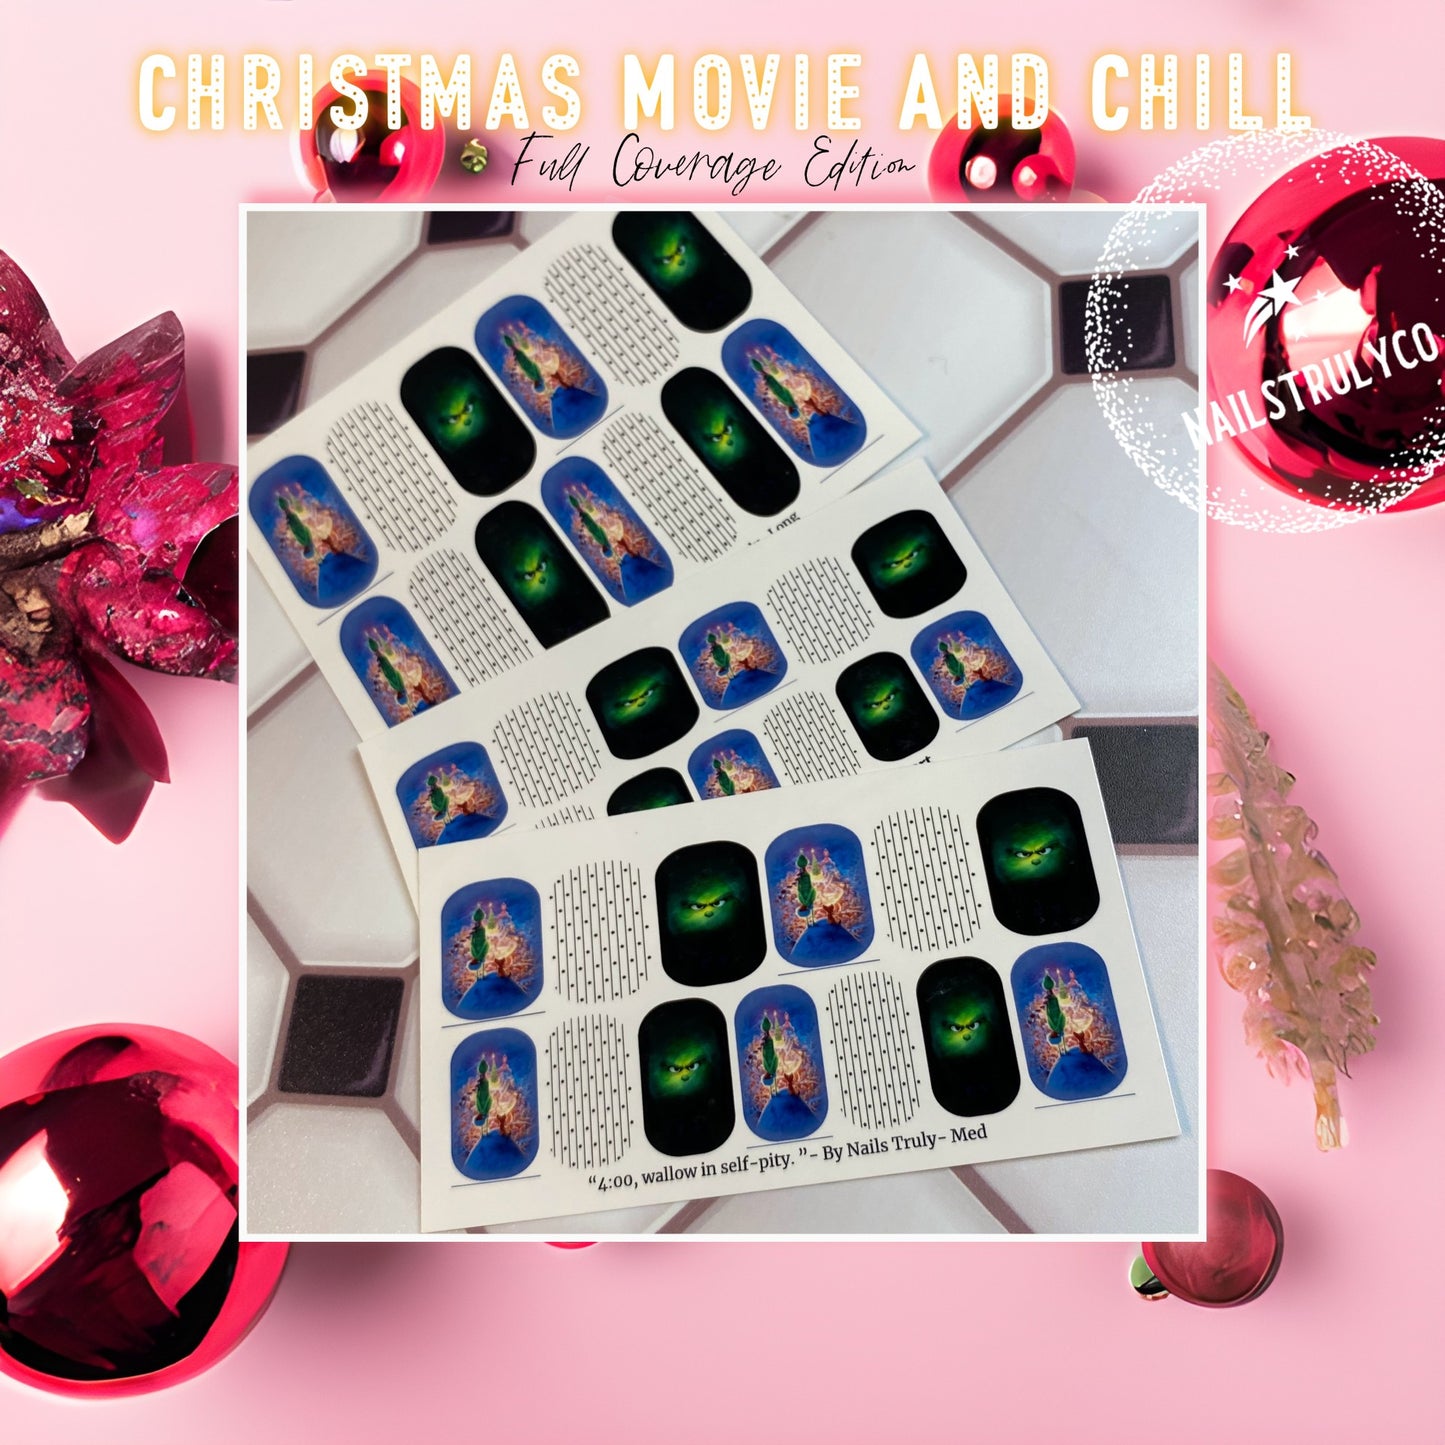 Decals For Nails- 4:00, wallow in self-pity. - The Grinch (2018)